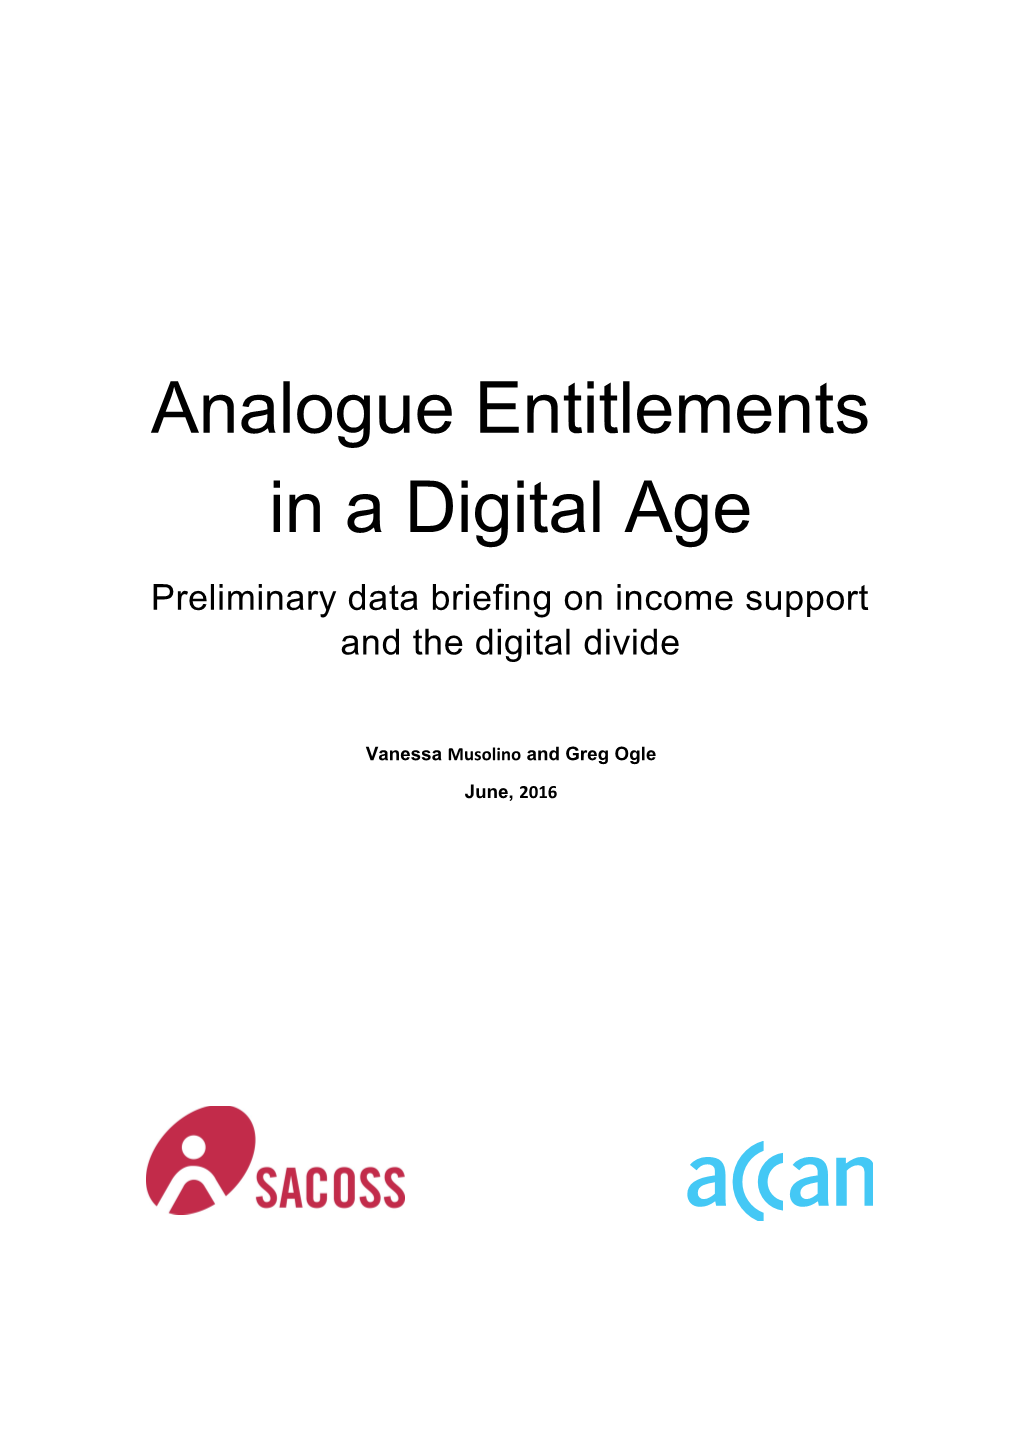 Analogue Entitlements in a Digital Age